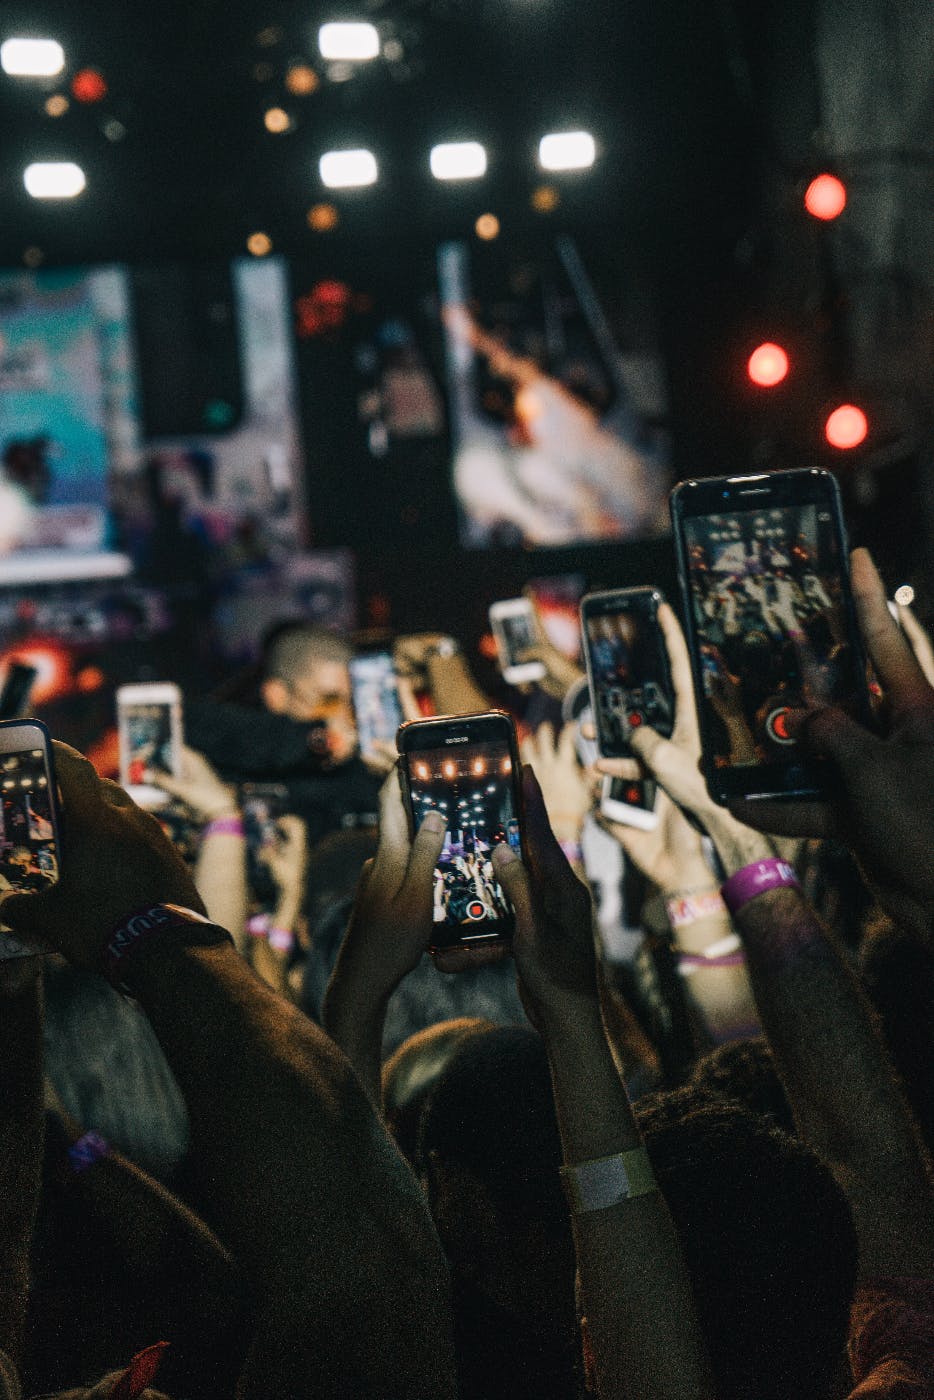 Hundreds of people taking video of a concert with their smartphones